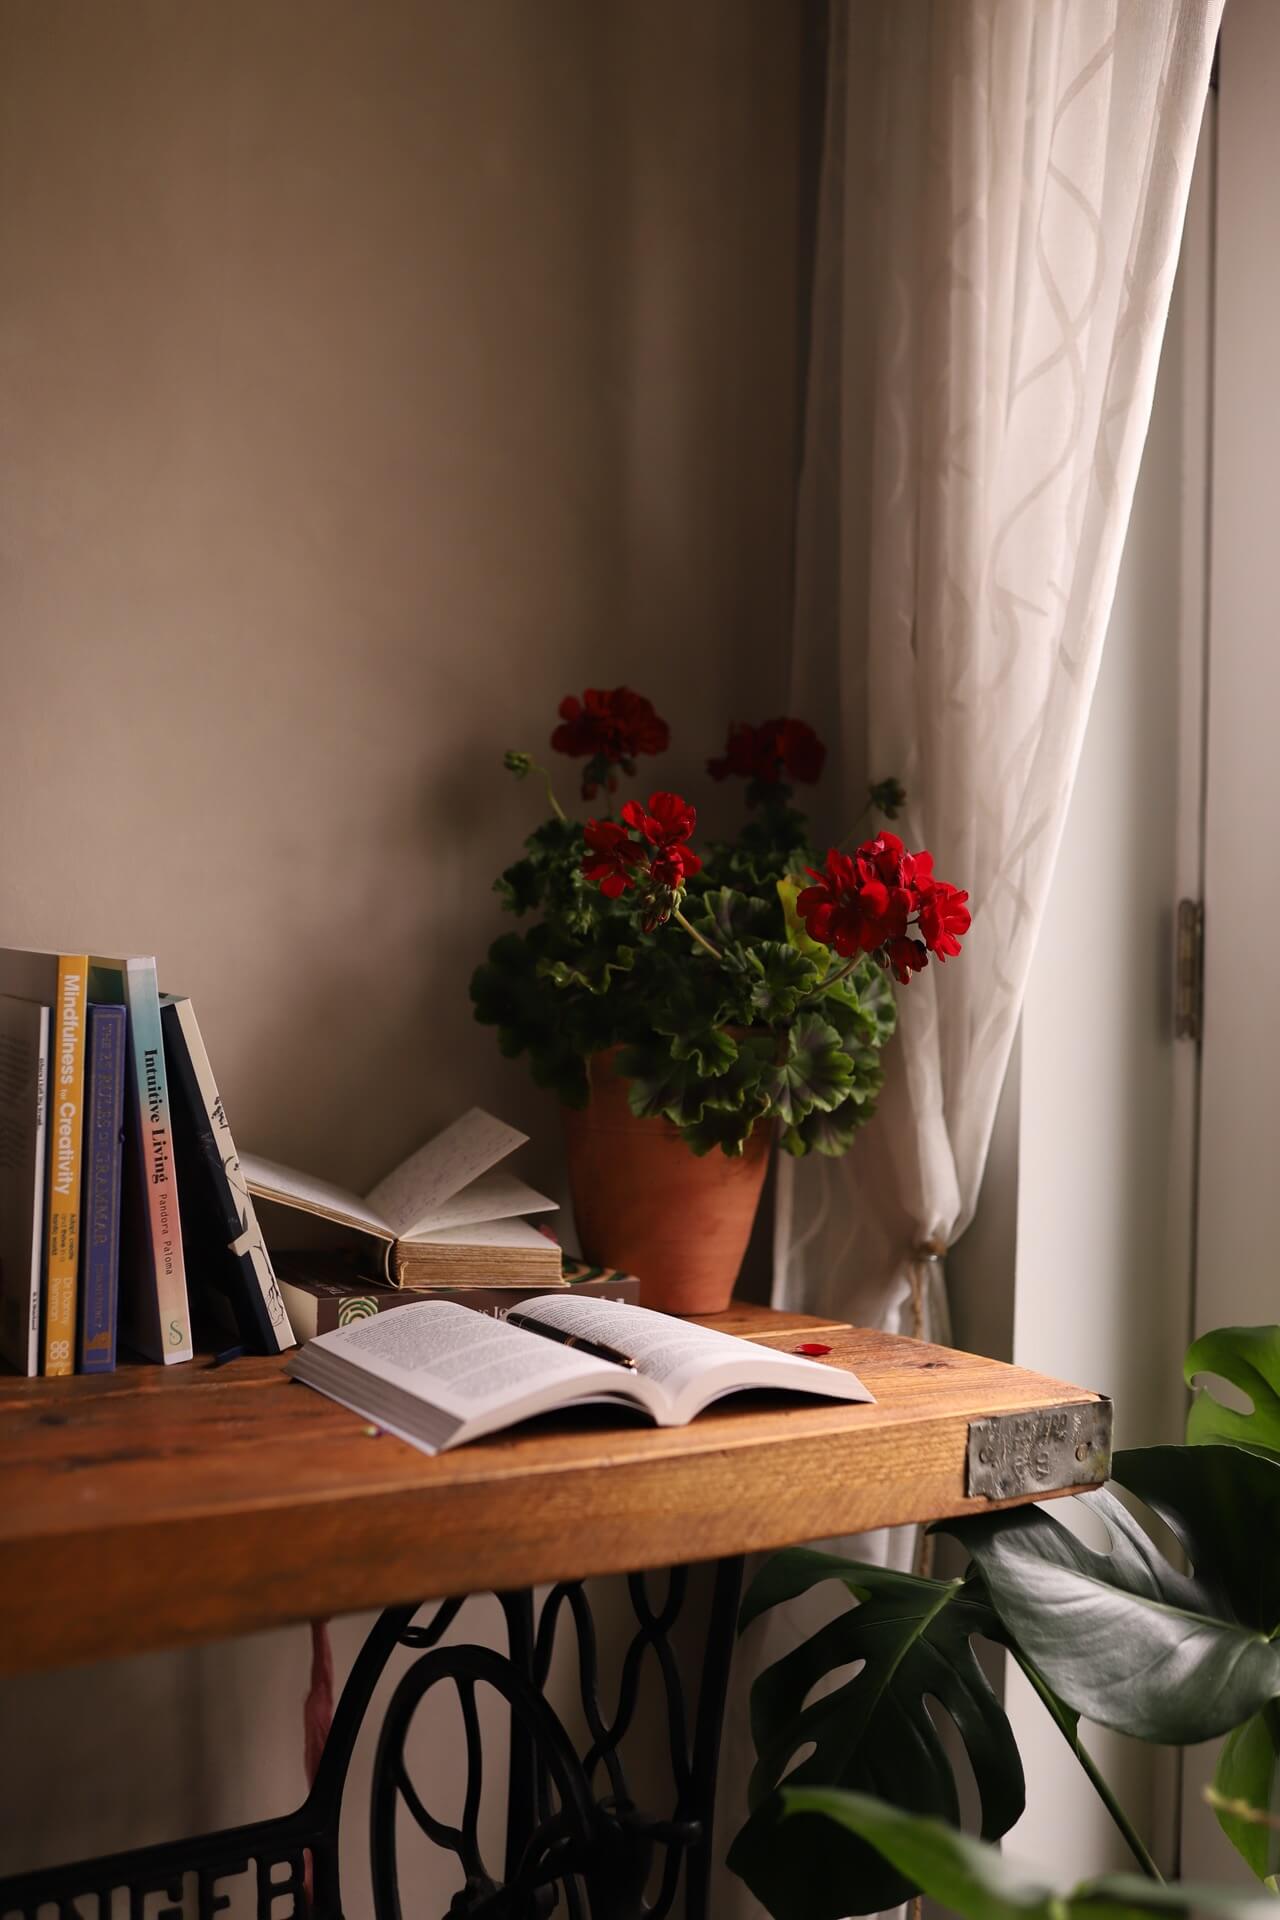 Desk in the corner of a room with books and a potted plant